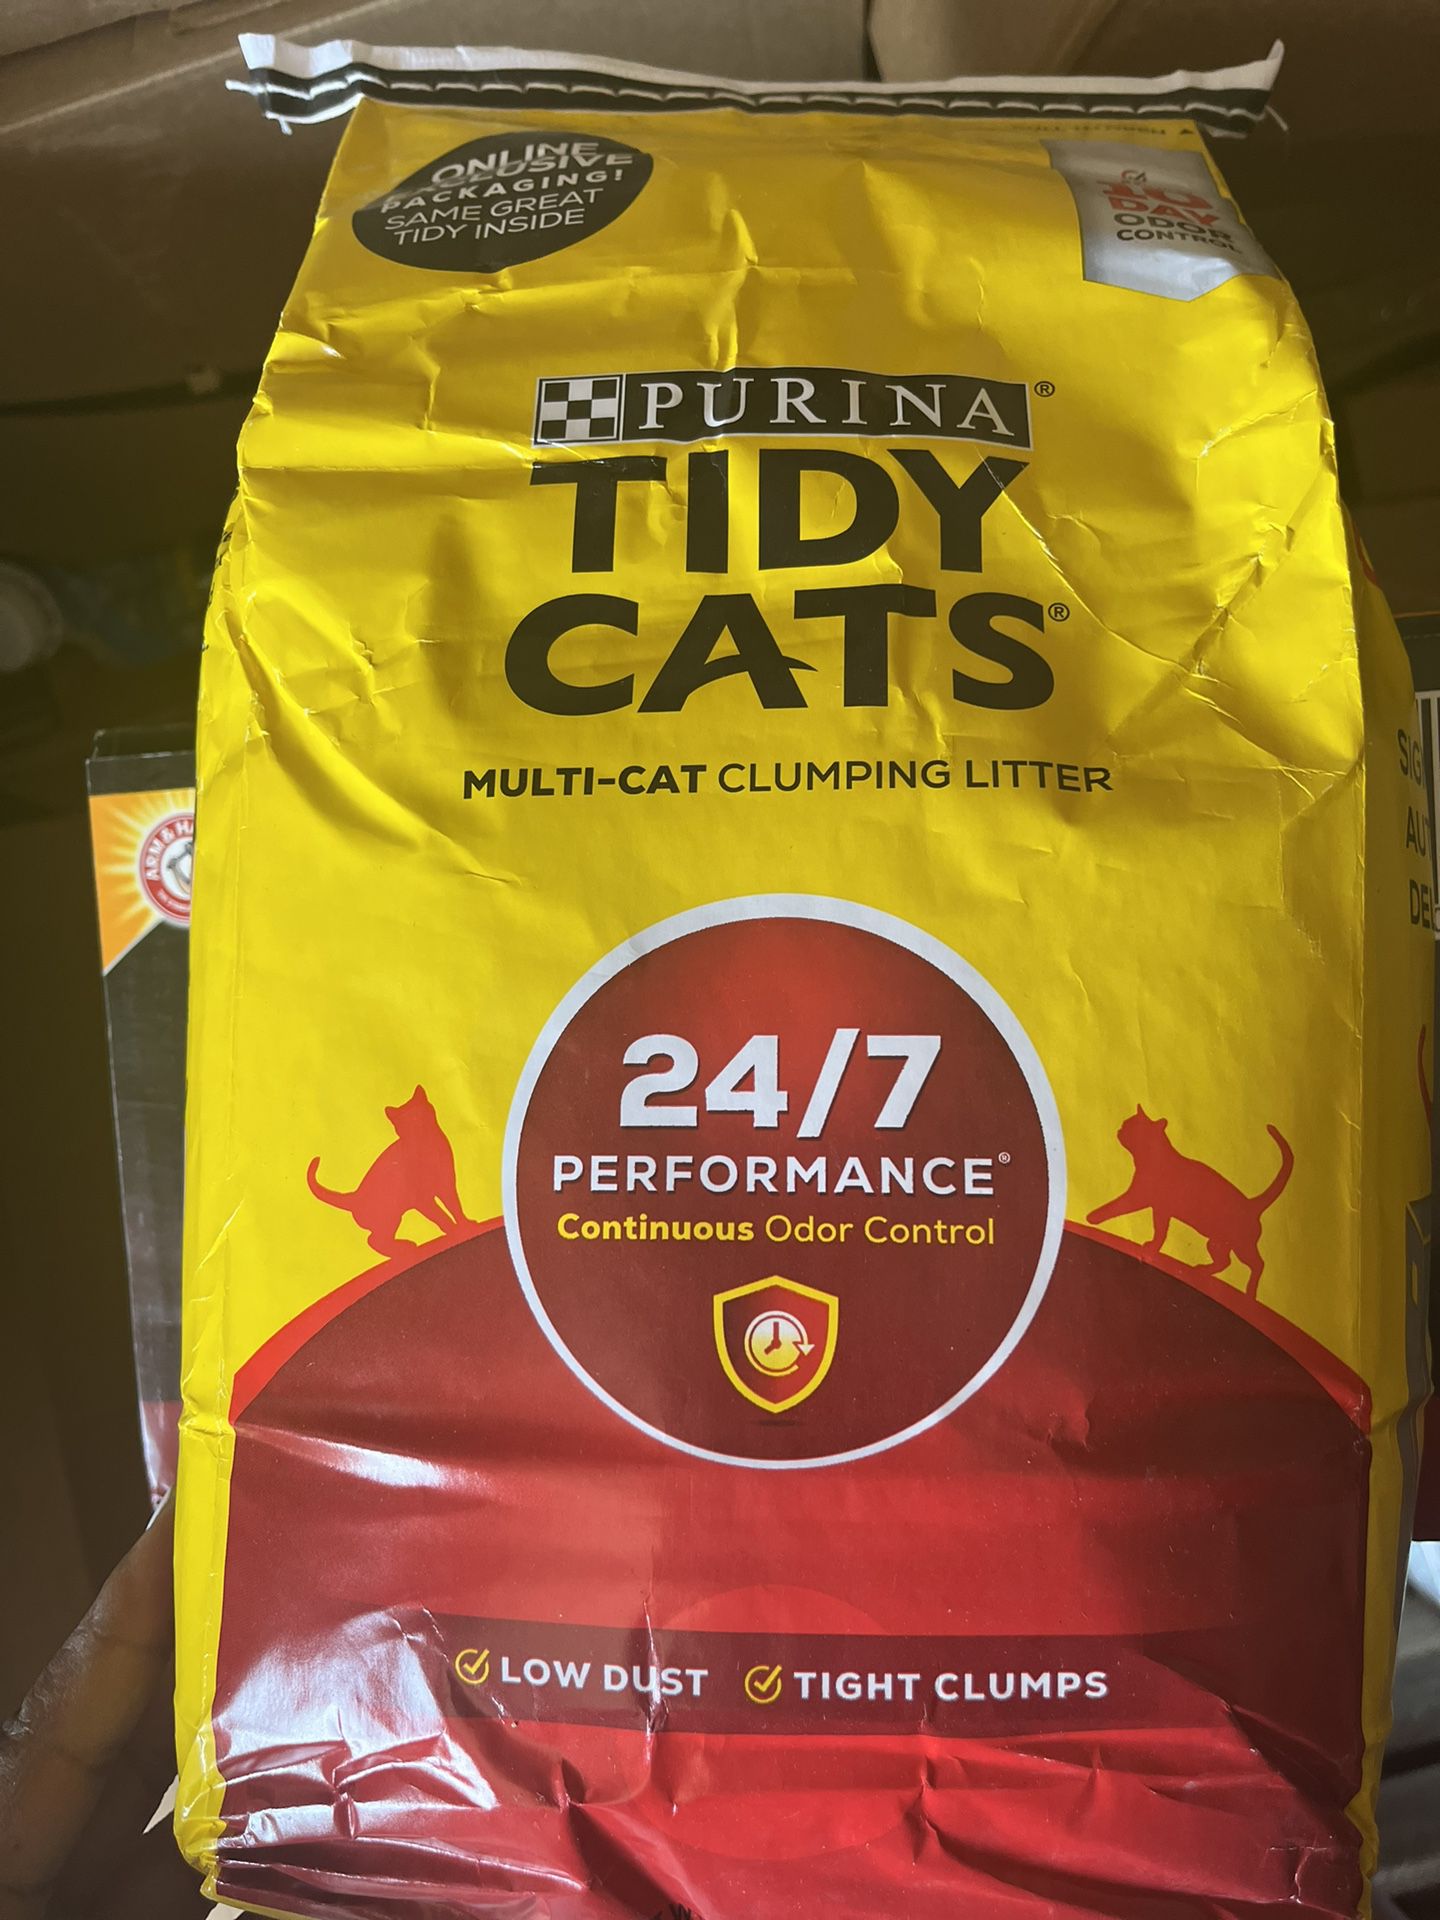 Purina Tidy Cats Clumping Litter